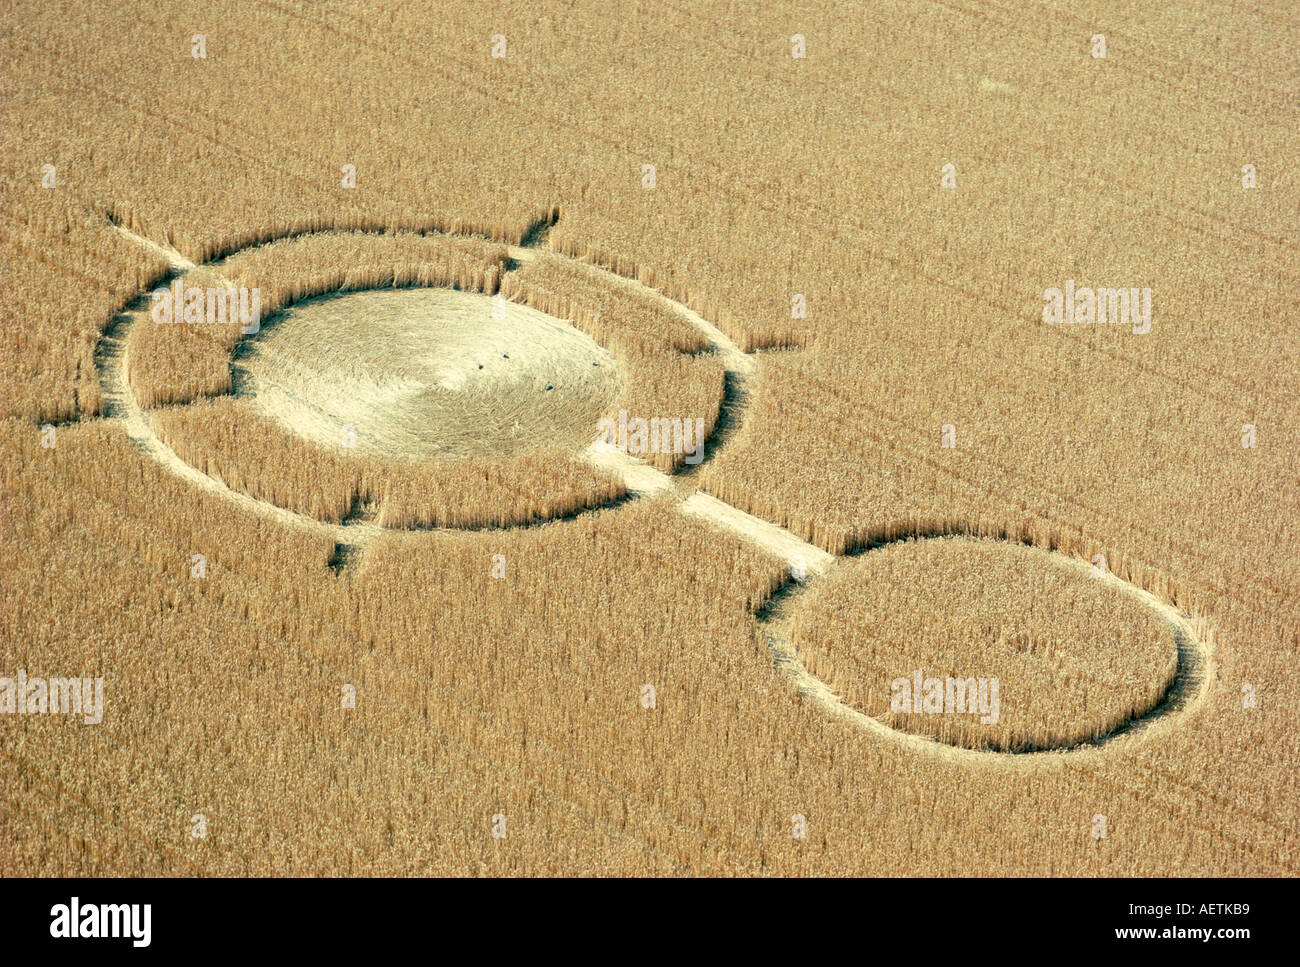 Aerial view of crop circles in a wheat field Wiltshire England United Kingdom Europe Stock Photo